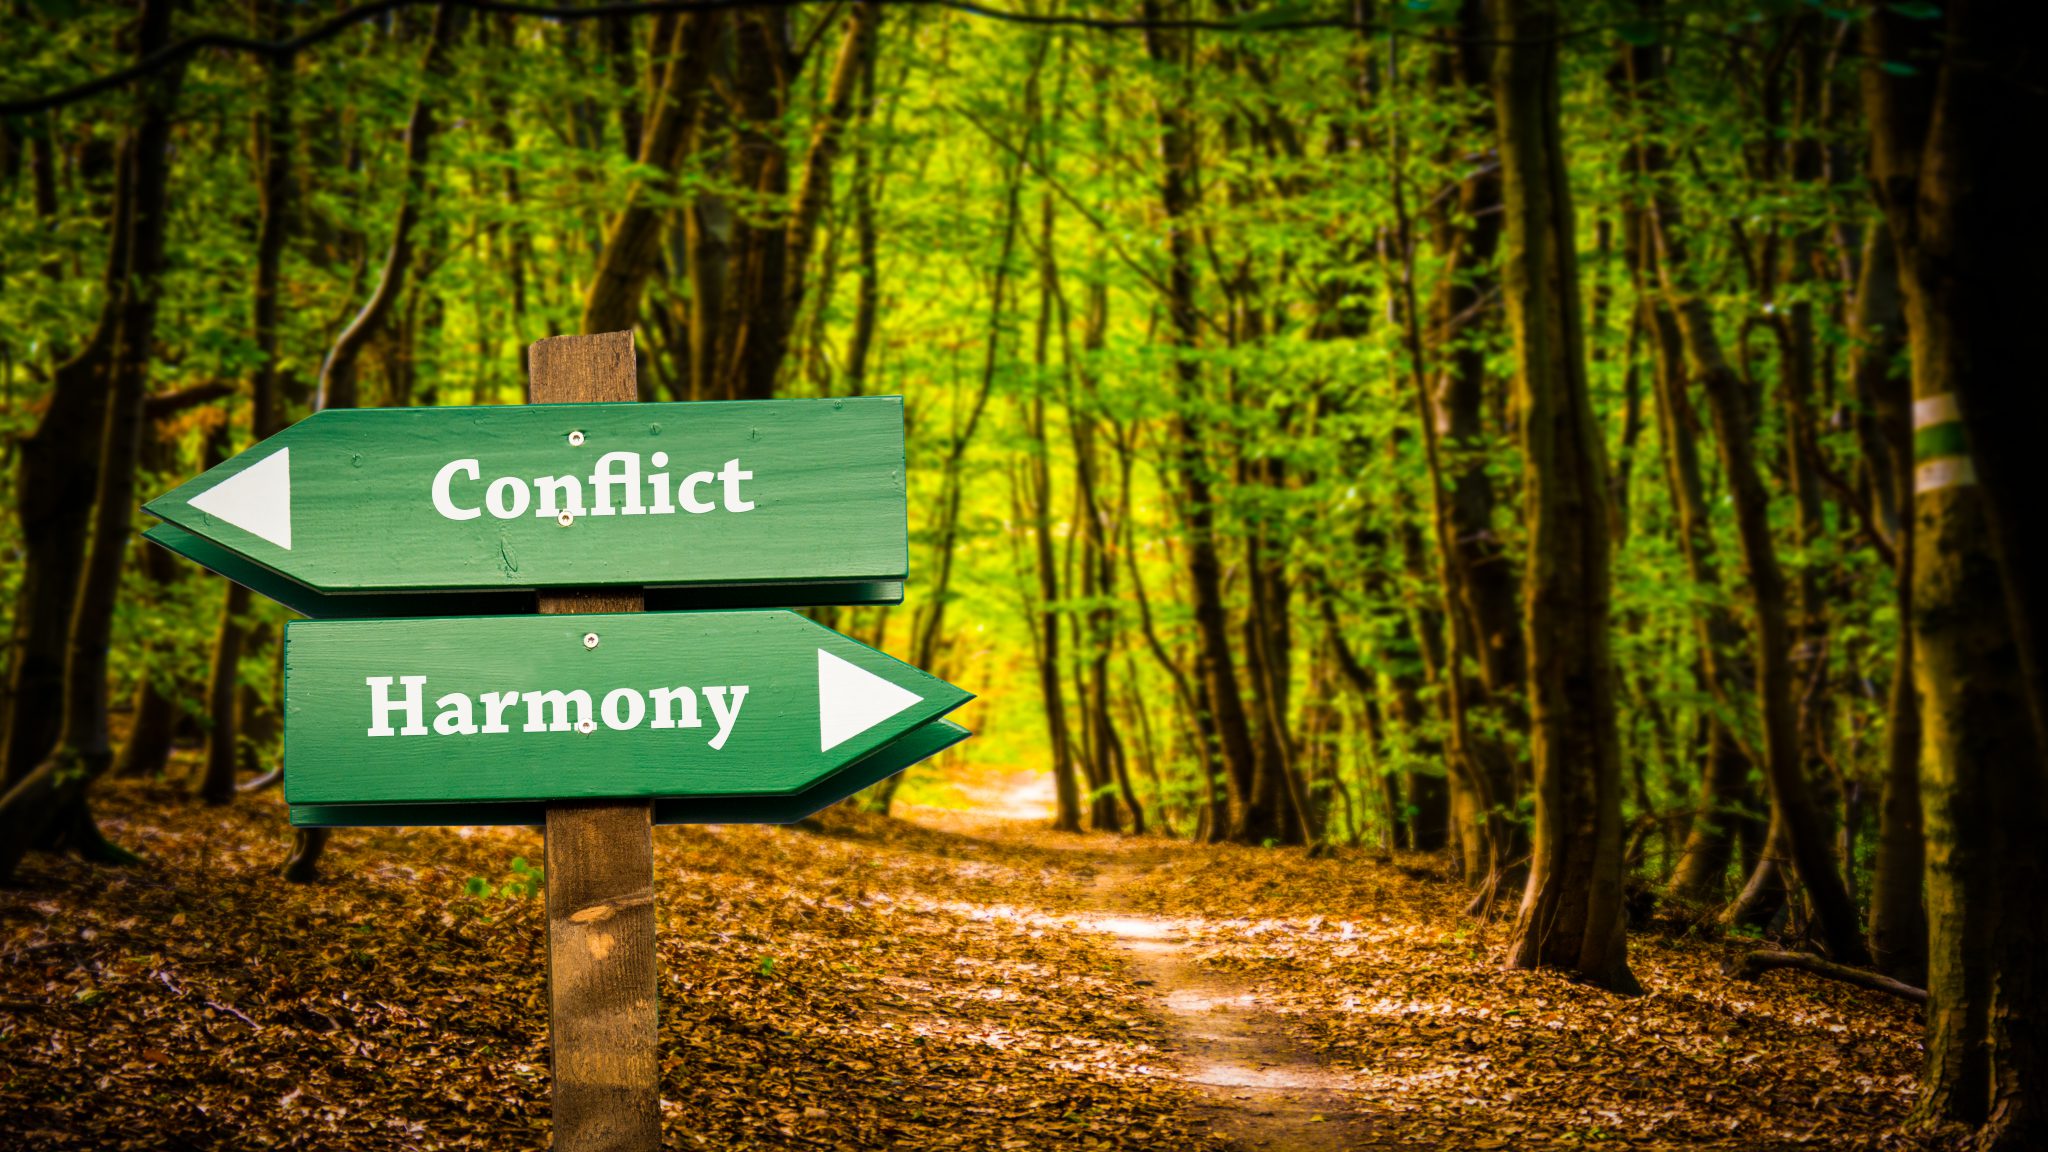 Street,The,Direction,Way,To,Harmony,Versus,Conflict